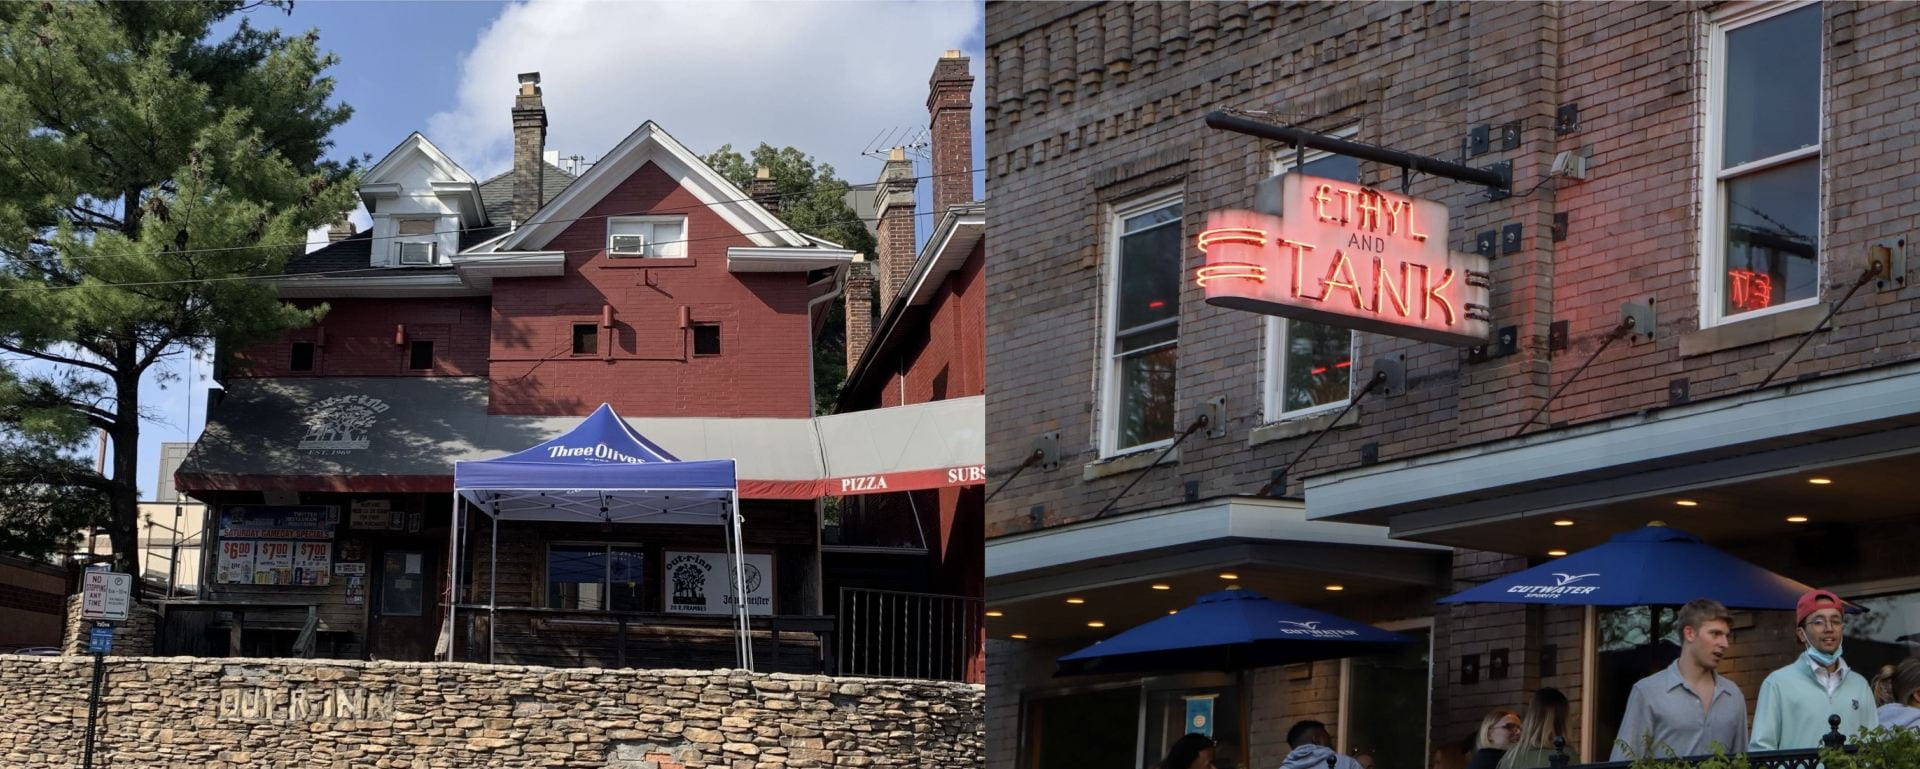 Local bars Out-R-Inn (left) and Ethyl & Tank (right) were named best North and South Campus bars, respectively, in The Lantern's 2023 "Best of OSU" polling. Credit: Mackenzie Shanklin | Lantern Files